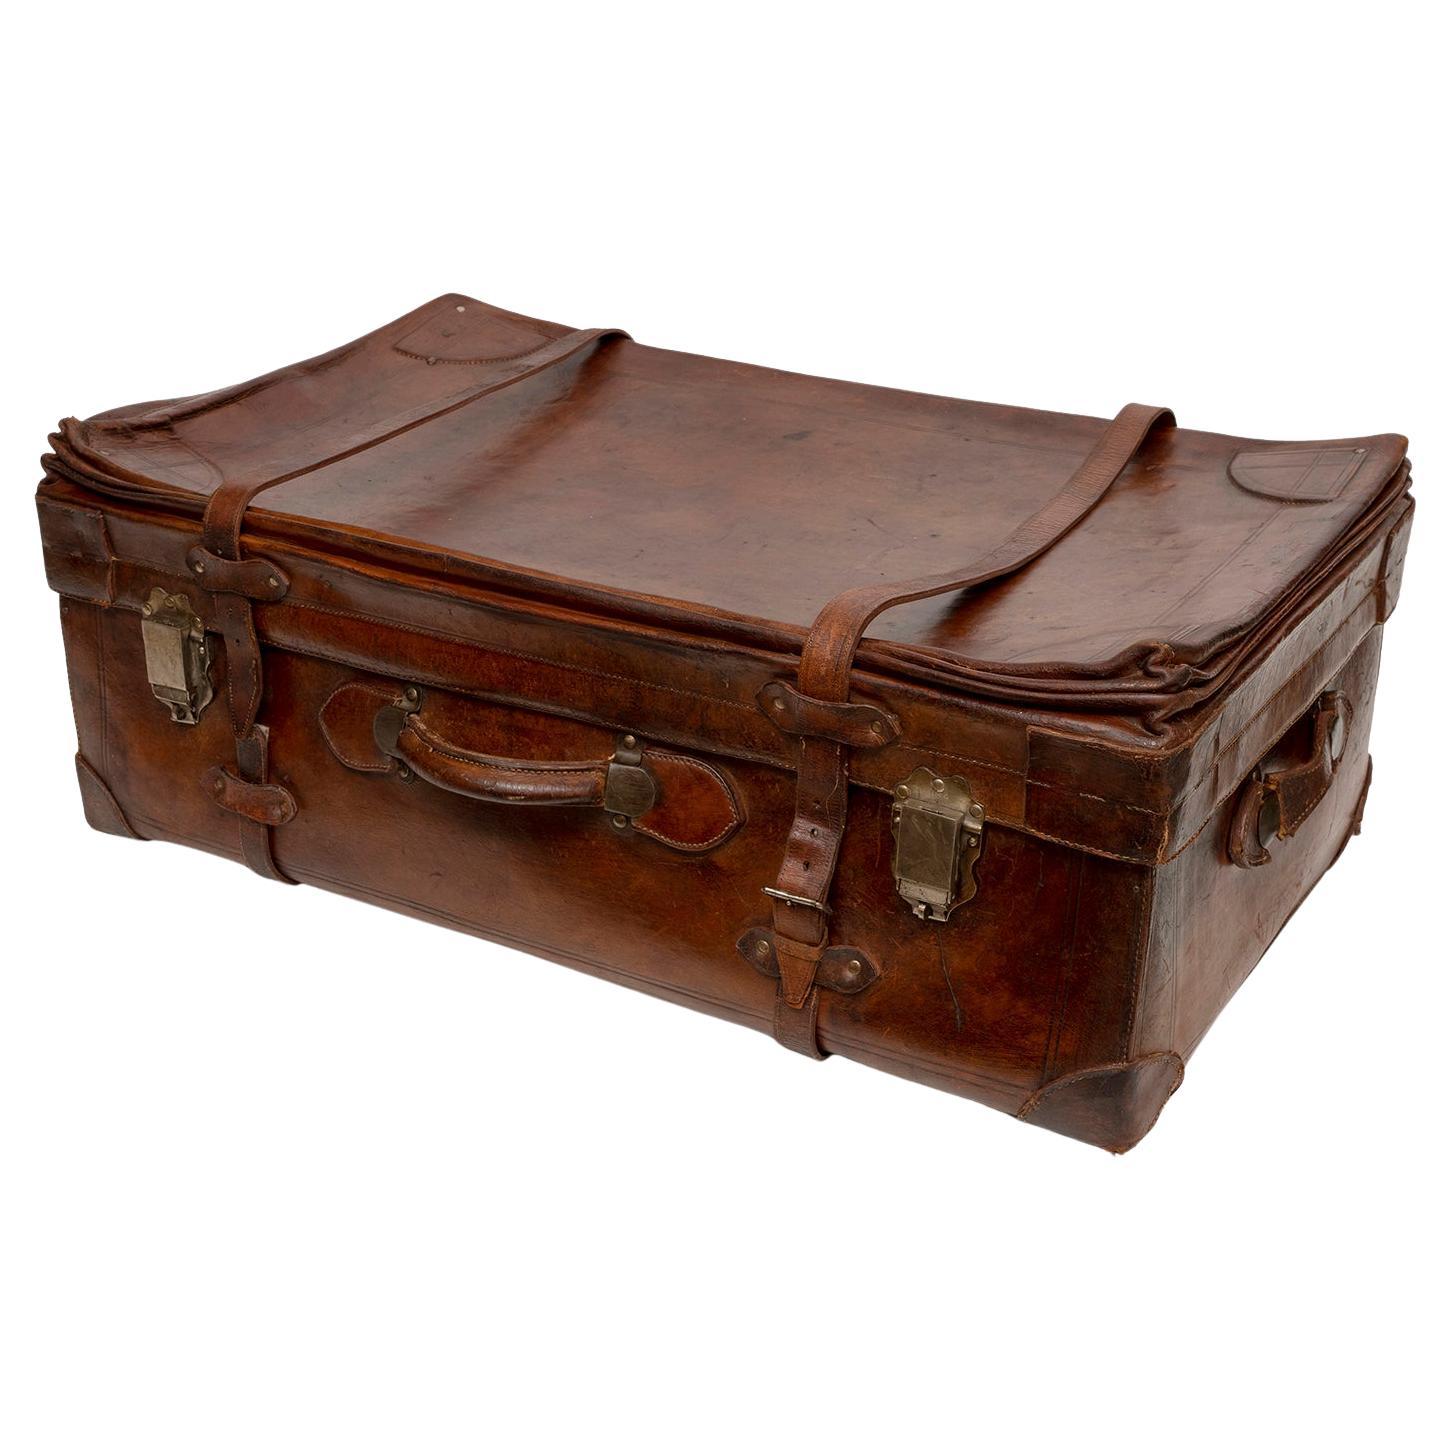 Trunk Steamer Overseas Travel Leather Nickel USA Original Interior 82cm 32" long For Sale